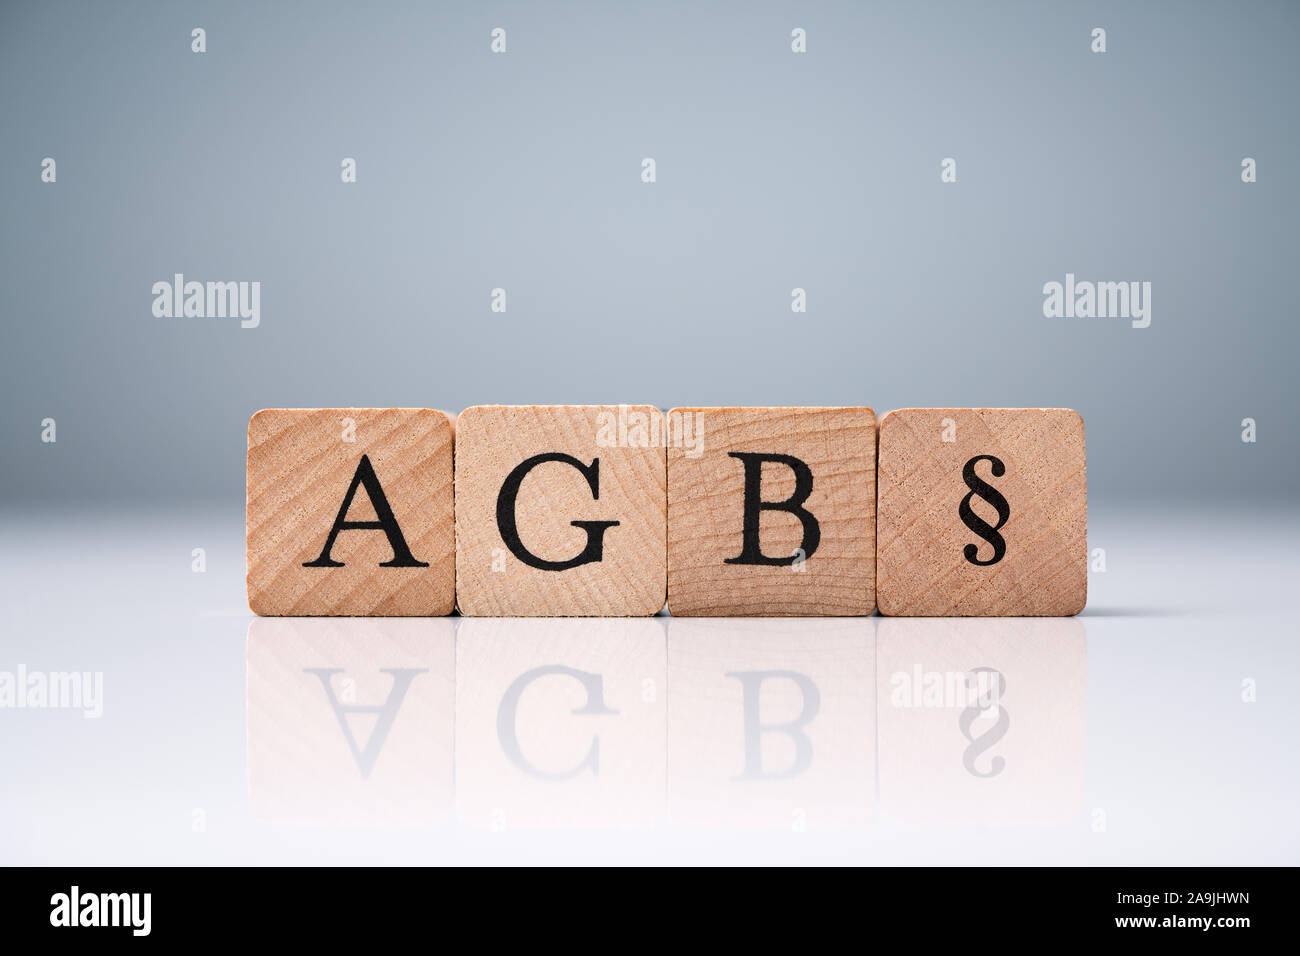 Closeup Of AGB Letters Standing For Standard Form Contract In Germany Stock Photo